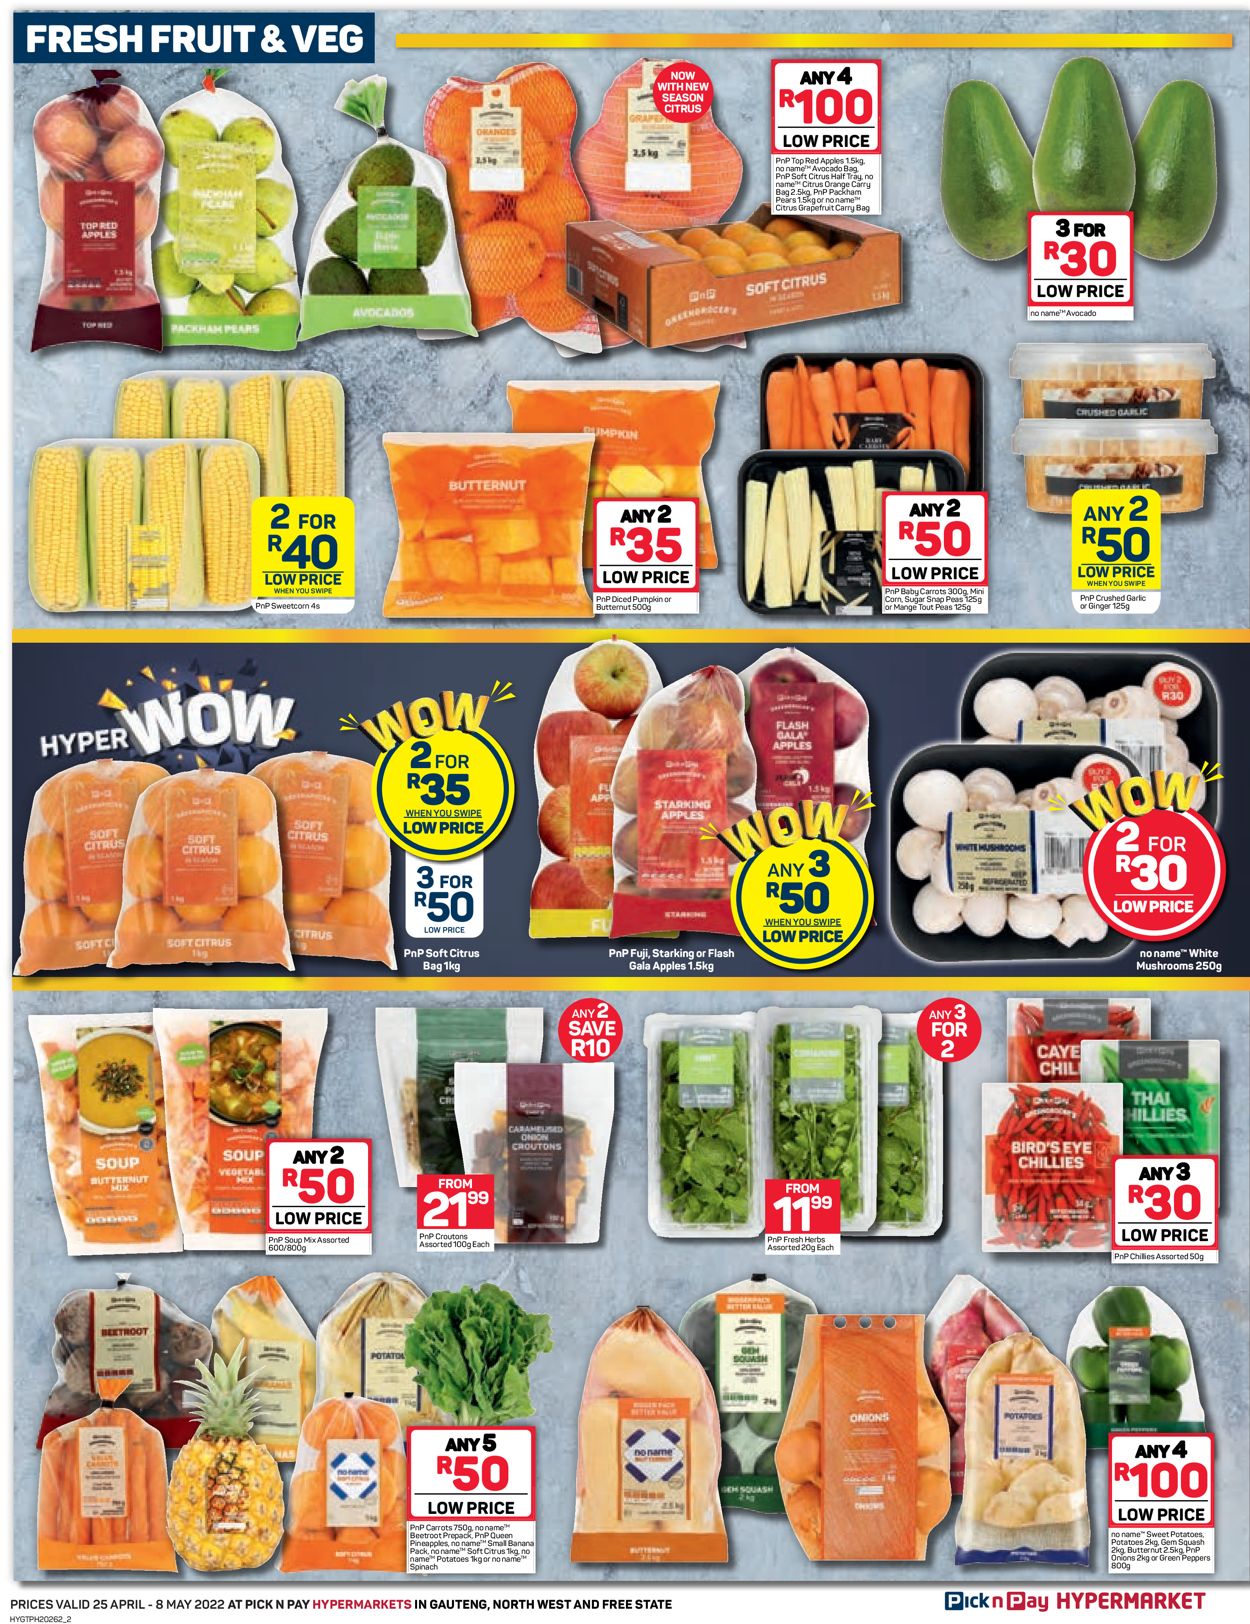 Pick n Pay Catalogue - 2022/04/25-2022/05/08 (Page 2)